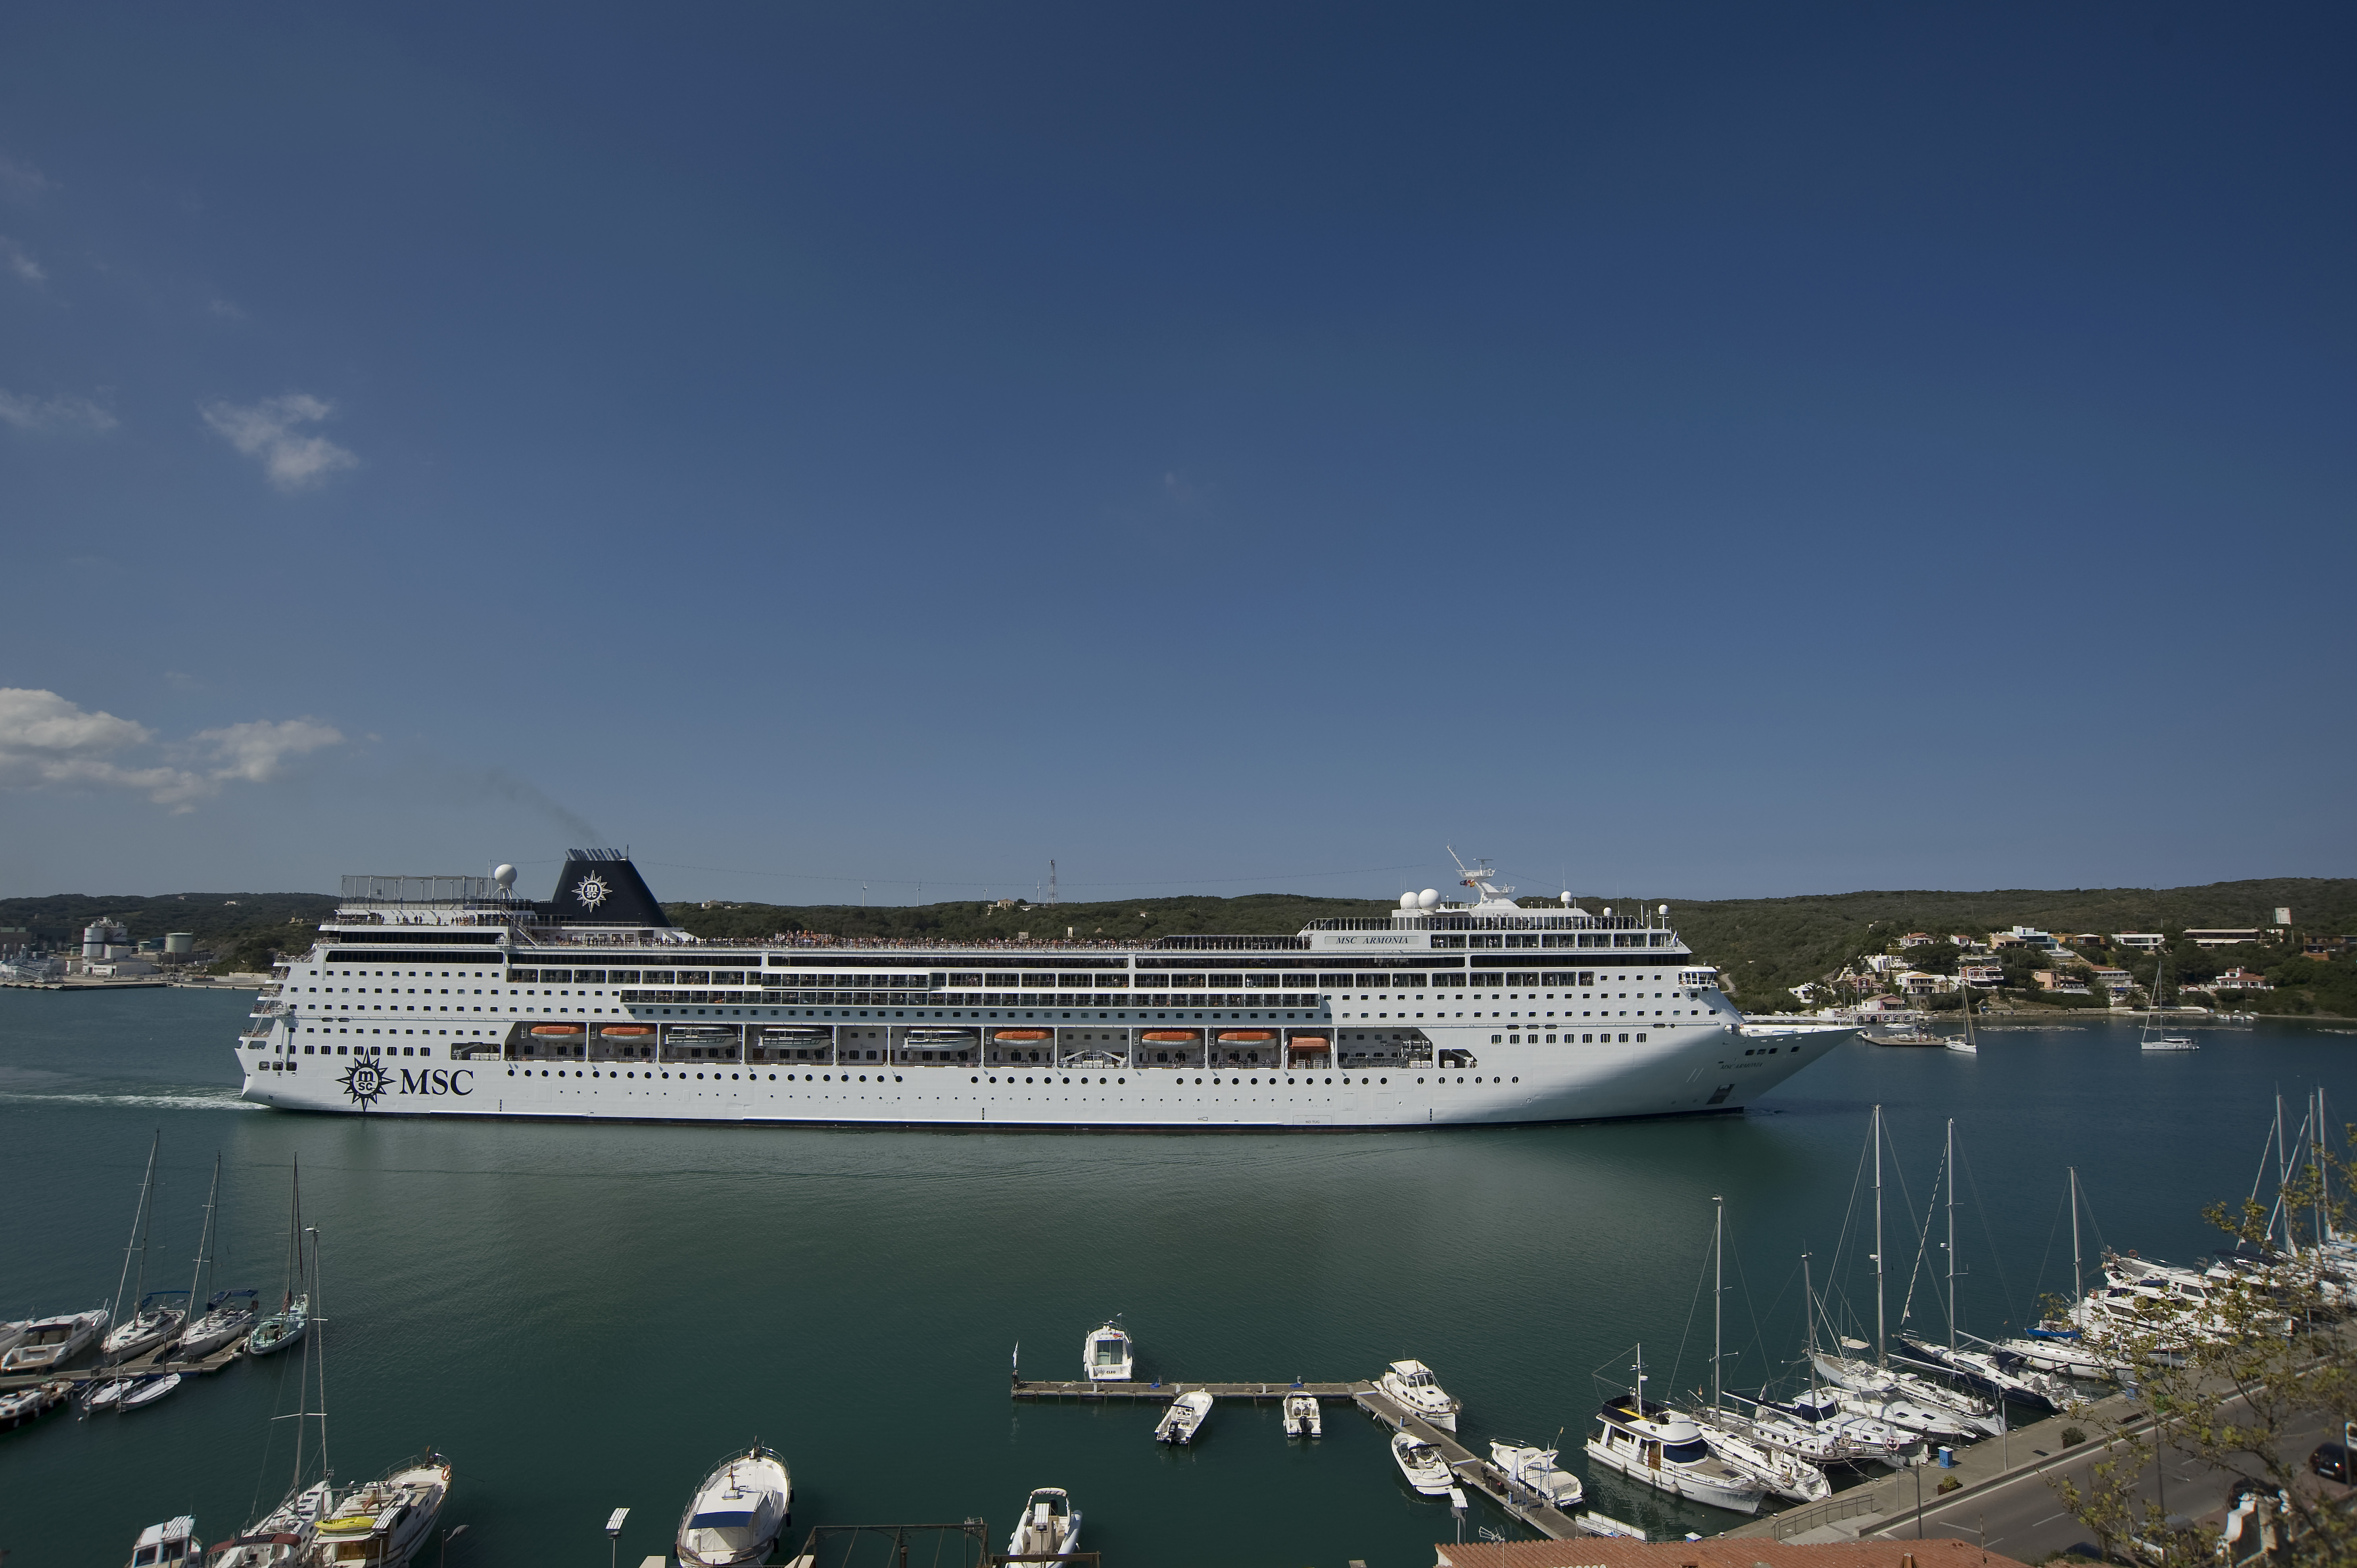 The Port of Mahon restricts the manoeuvring conditions of large cruise ships